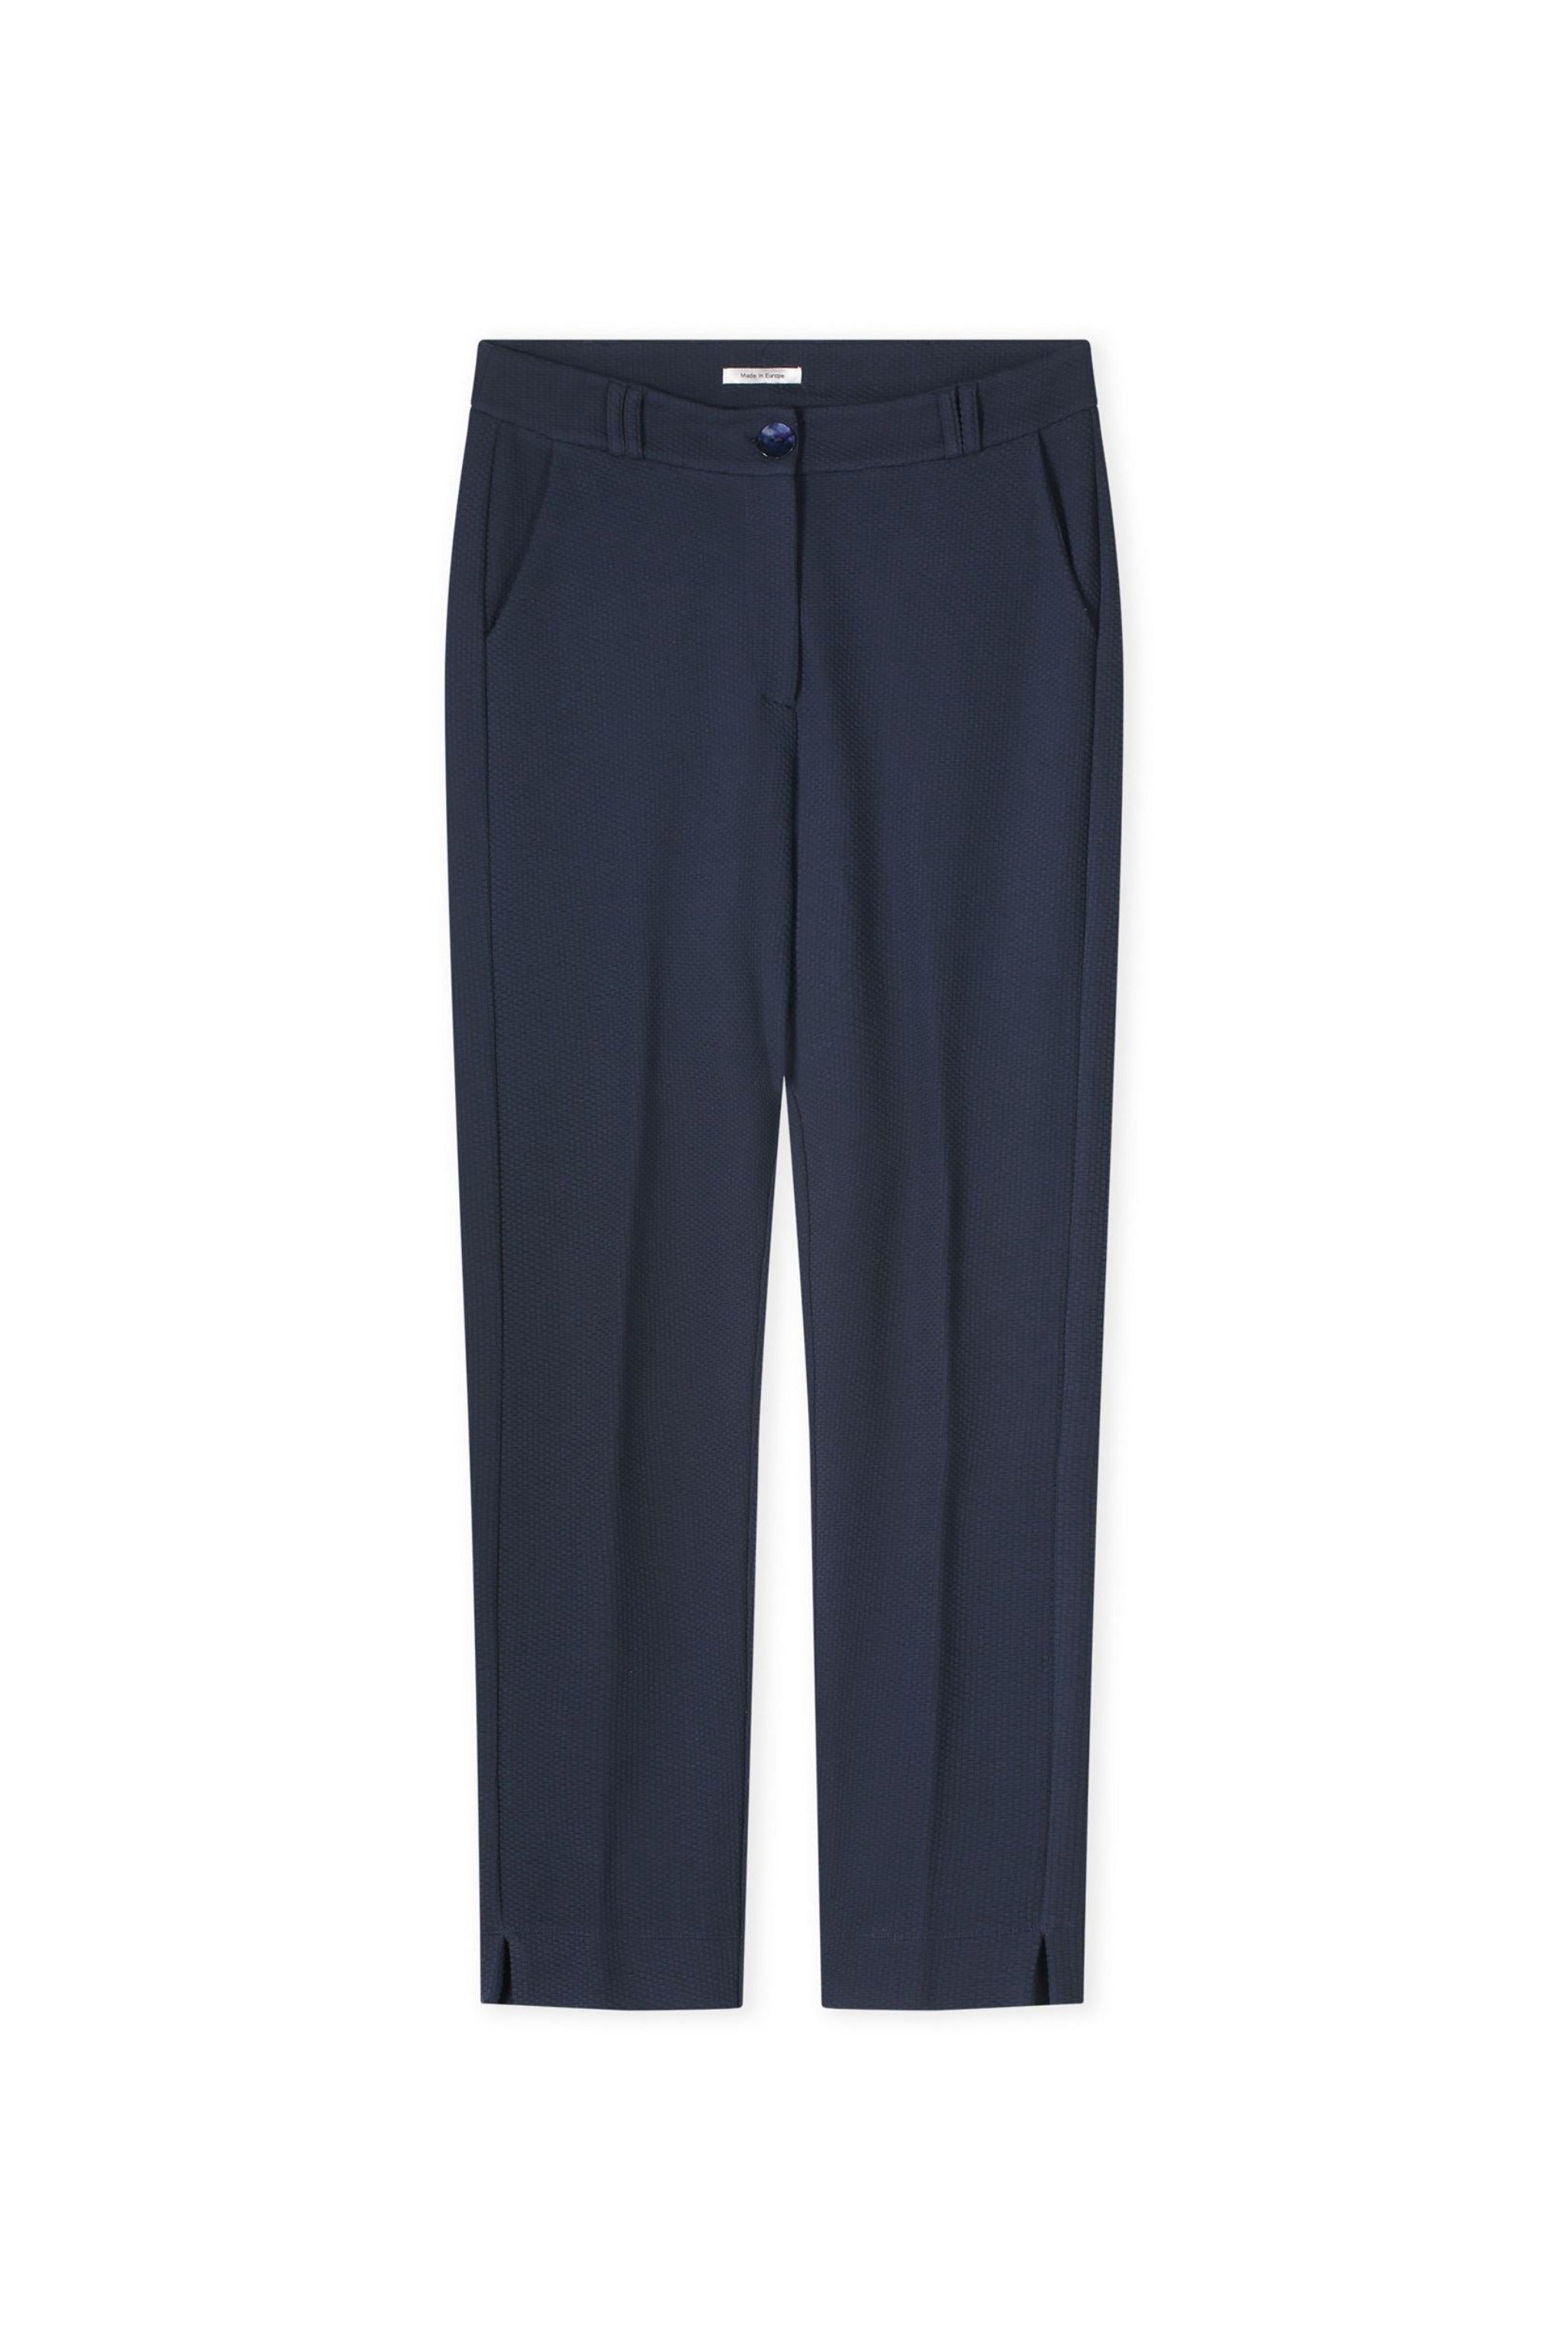 Jessica Structured Jersey Trousers - Deep Blue